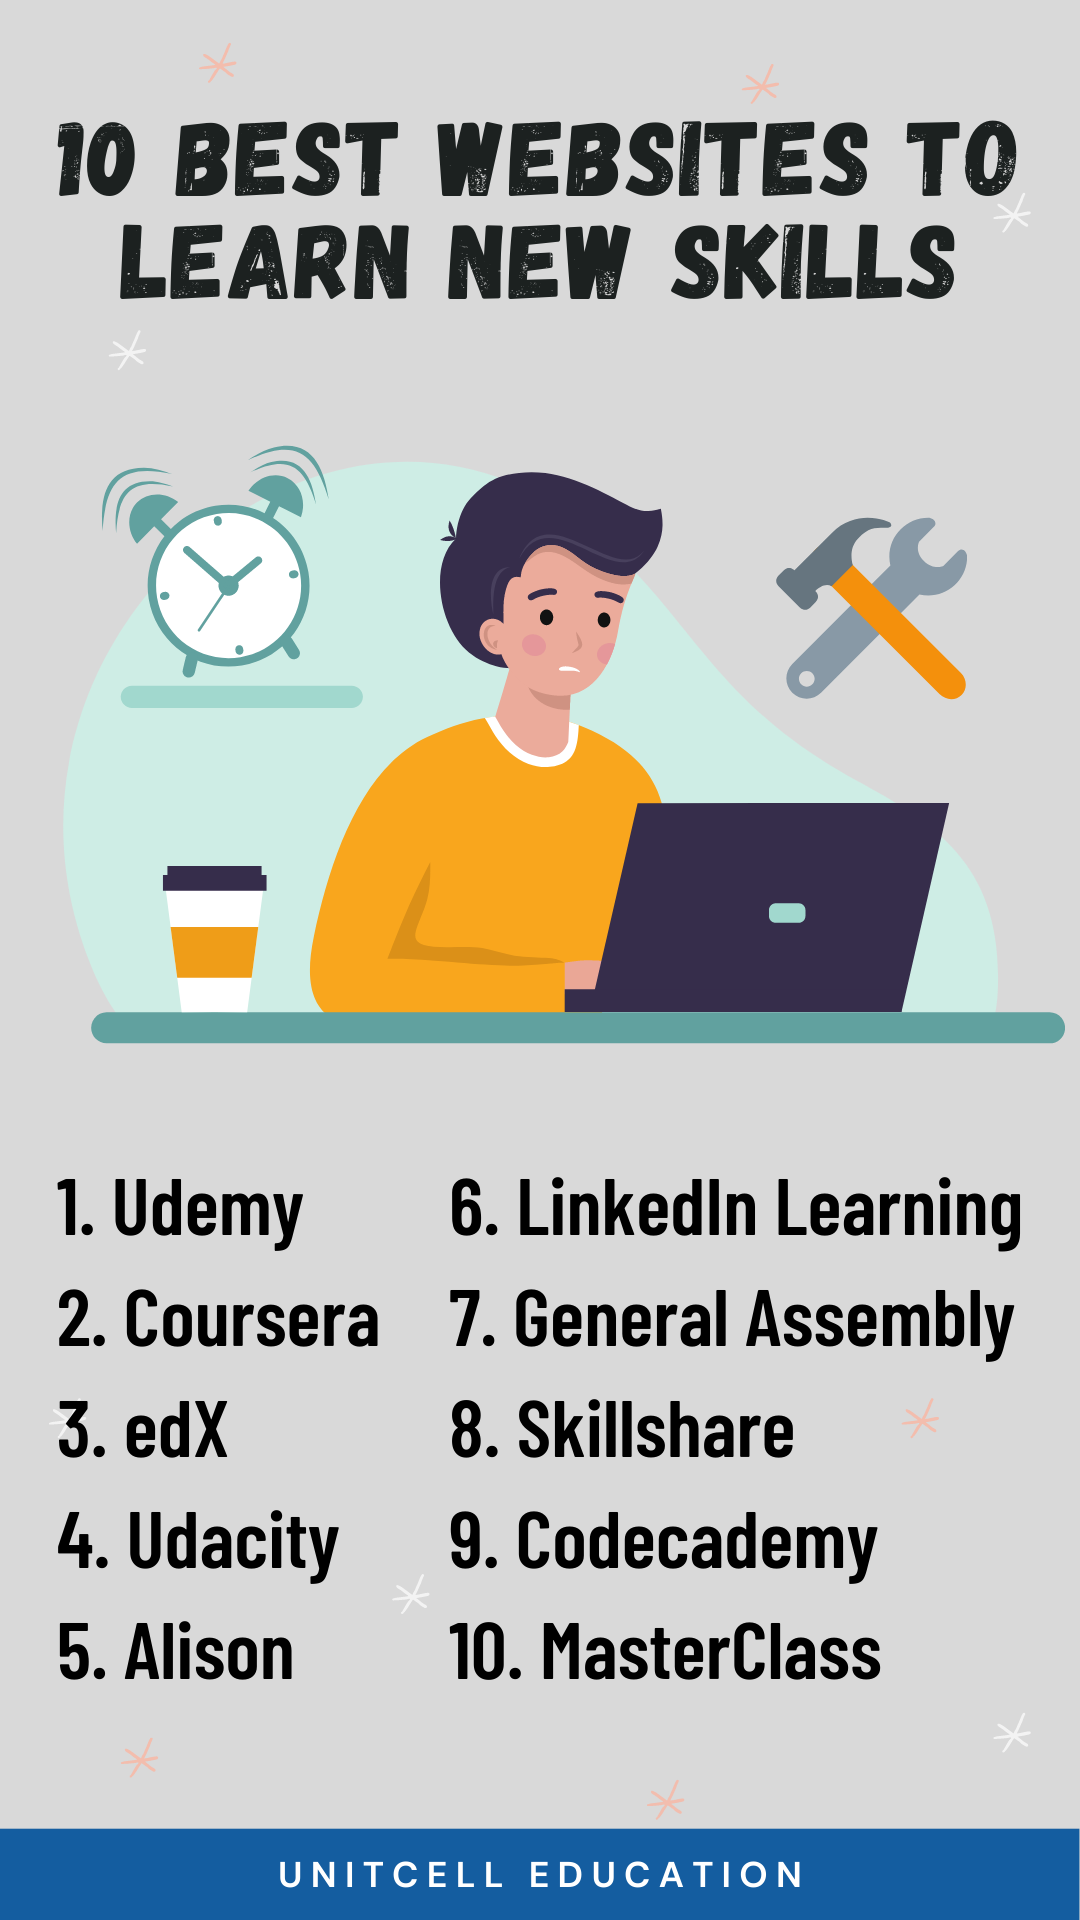 10 Best websites to learn new skills